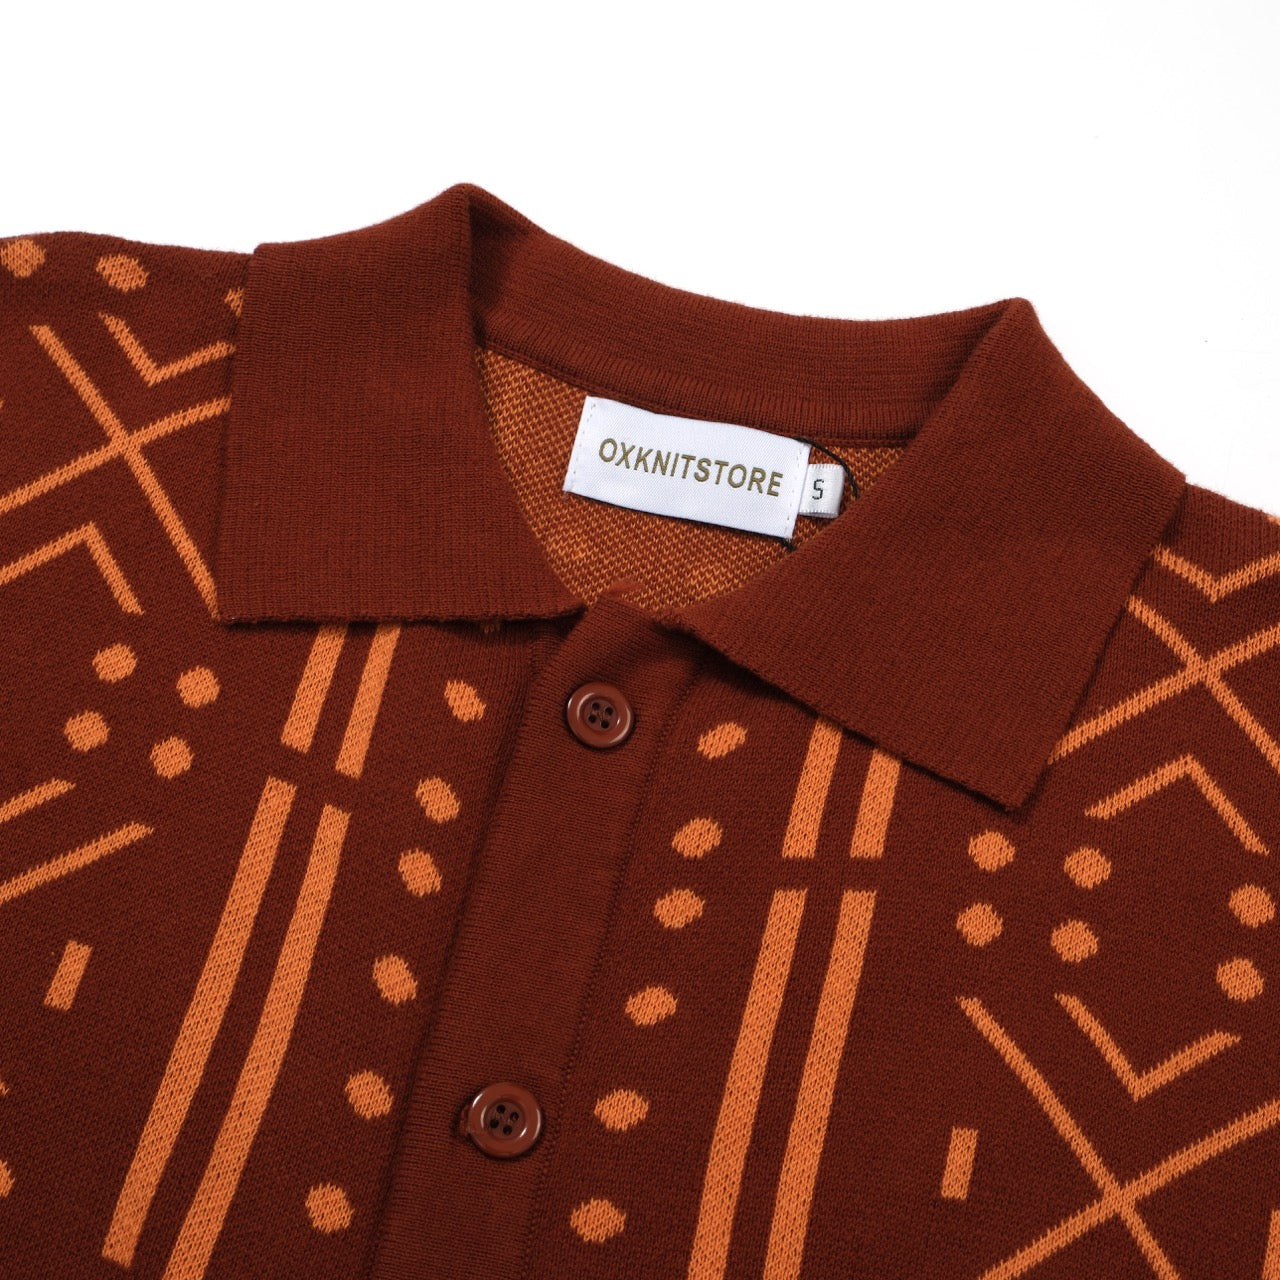 OXKNIT Men Vintage Clothing 1960s Mod Style Casual Brown Knit Retro Polo